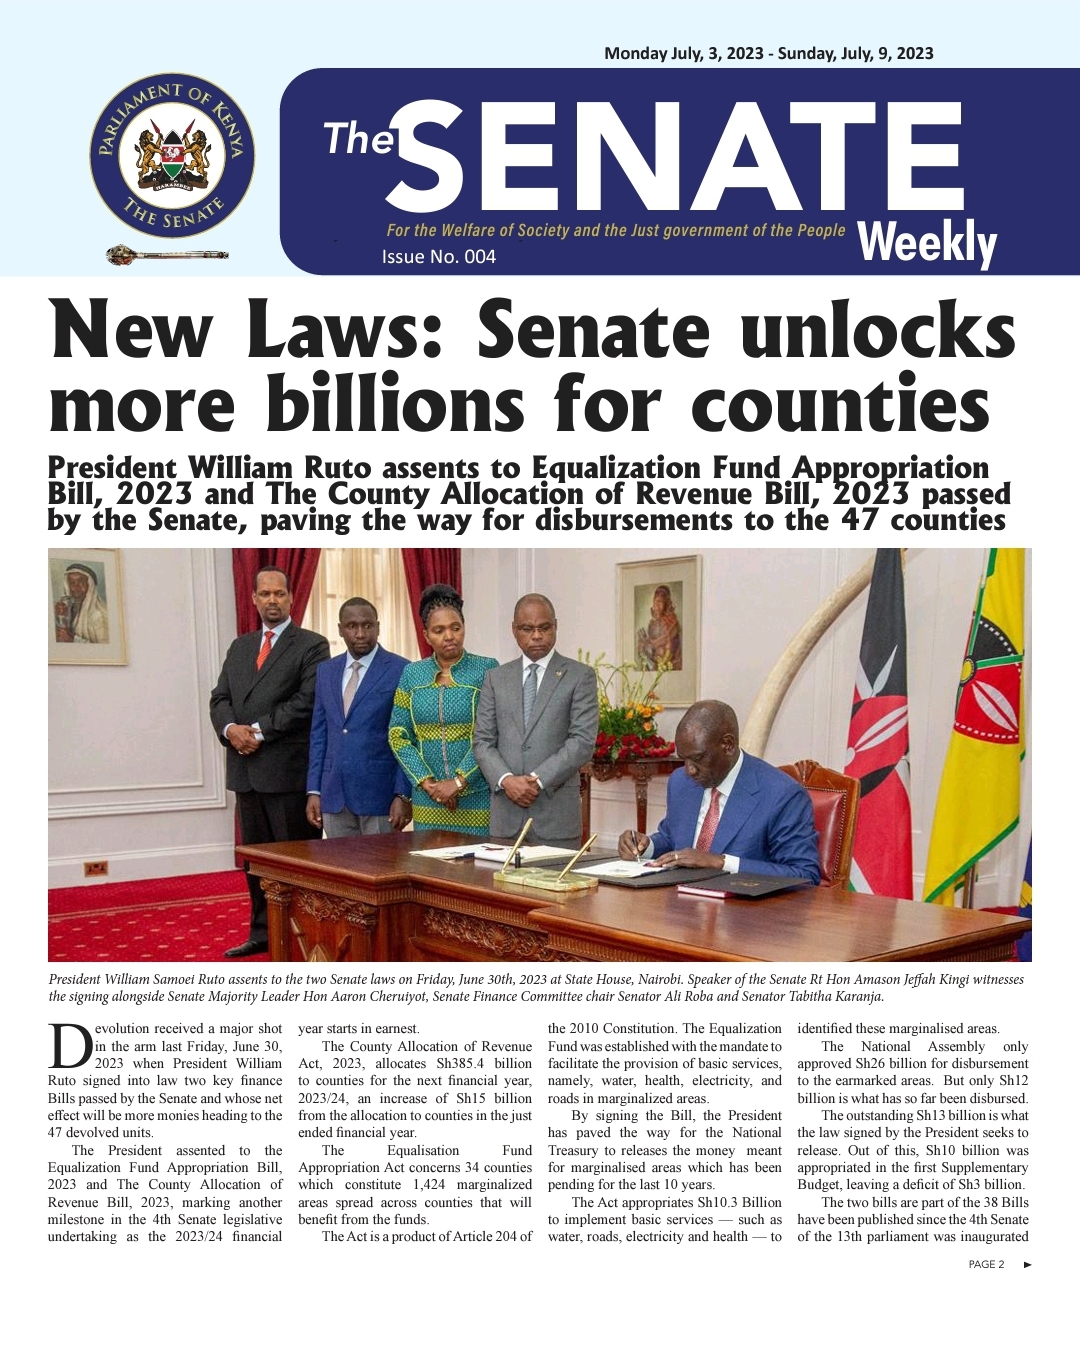 THE SENATE WEEKLY: Issue No.004